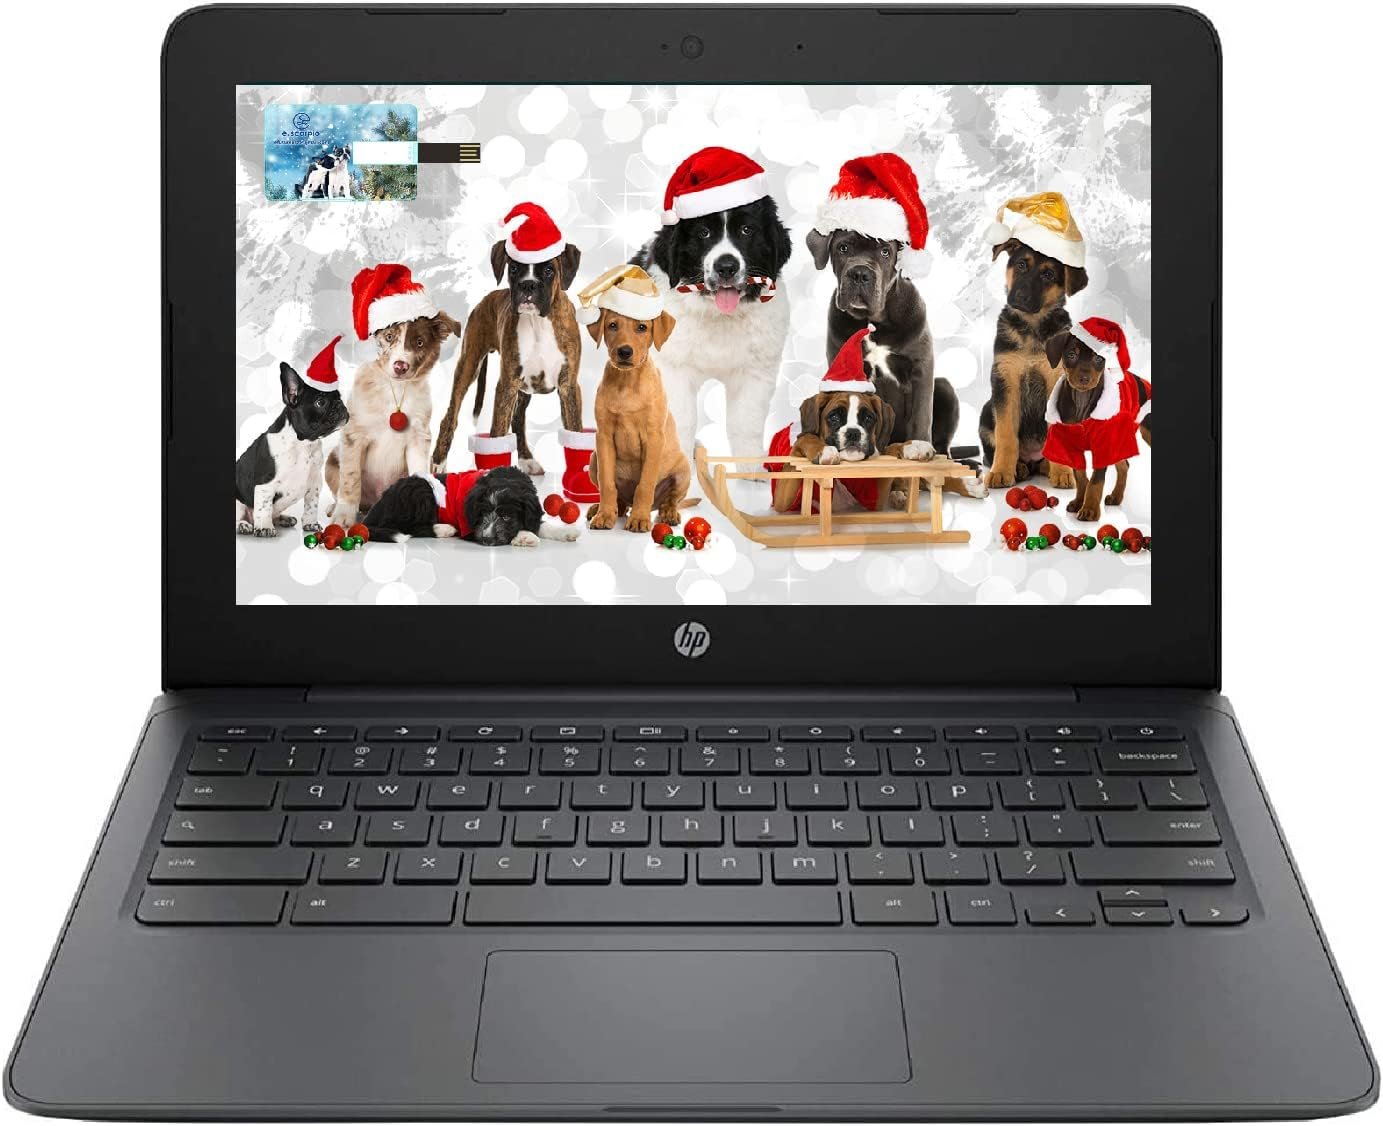 Newest HP Chromebook 11.6" HD Laptop for Business and Student